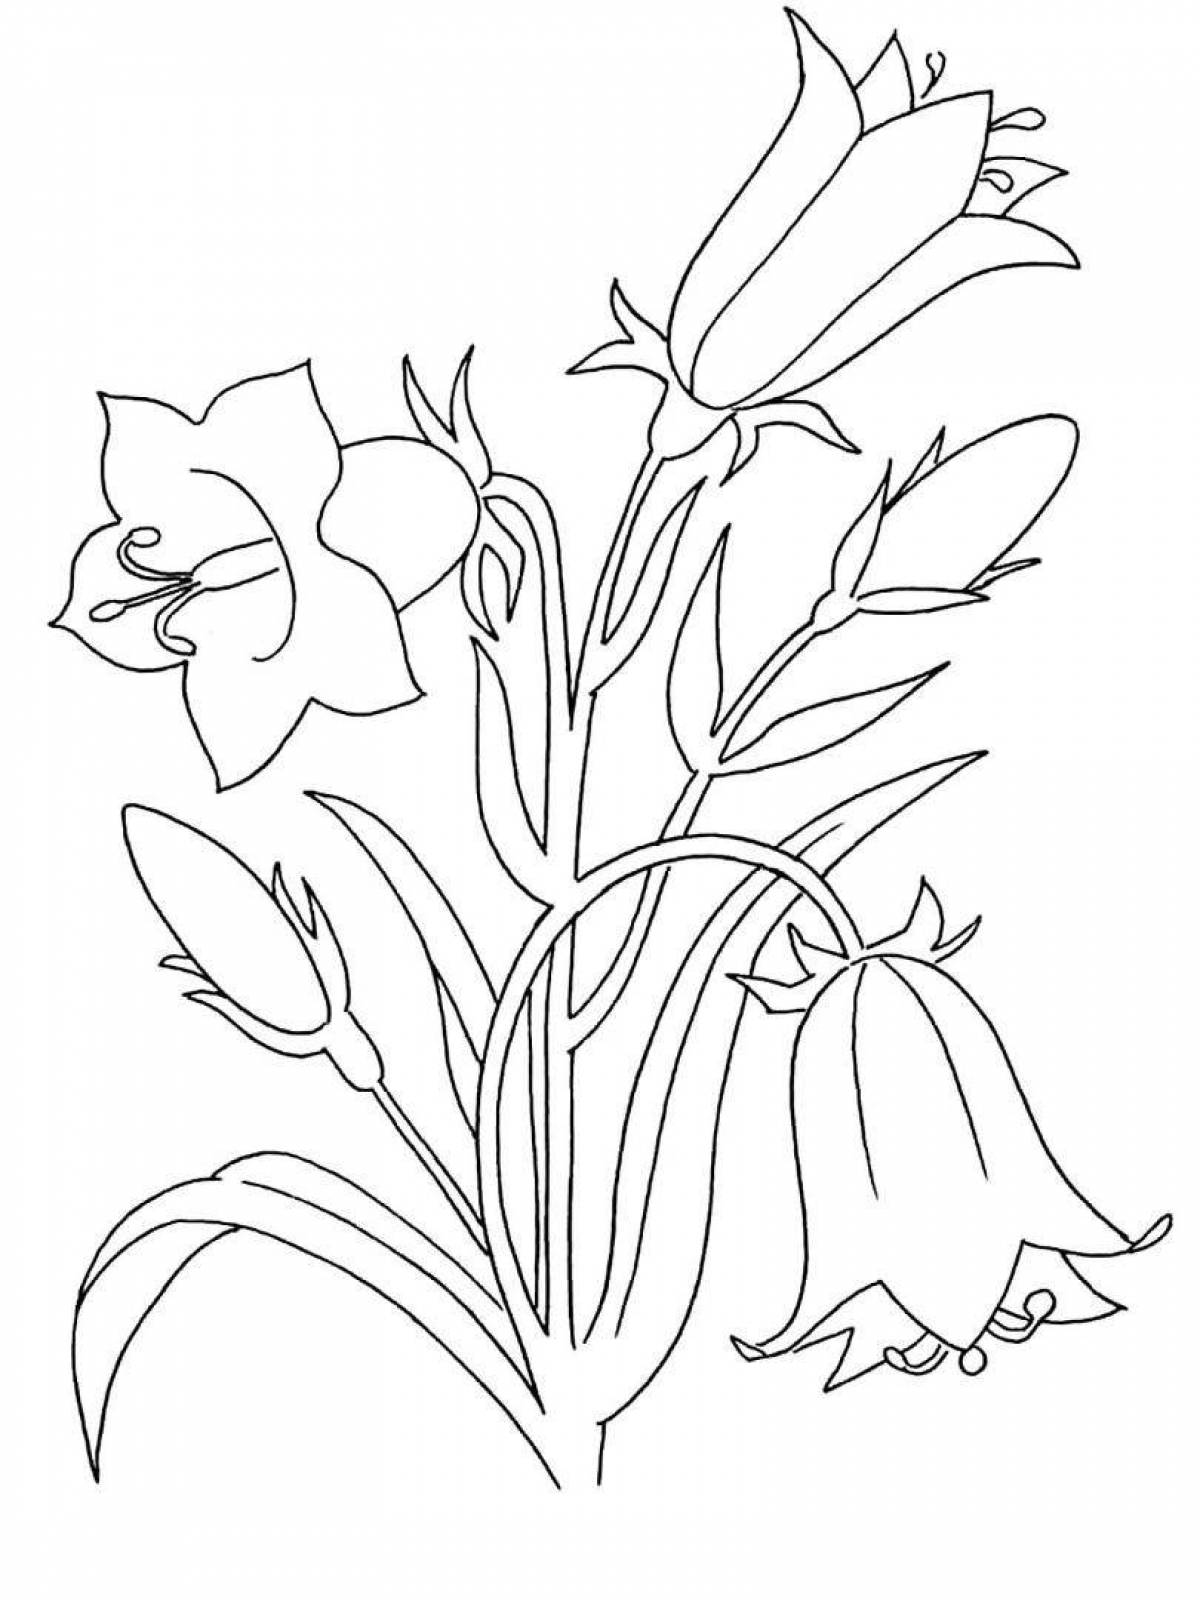 Coloring book glowing flower bell